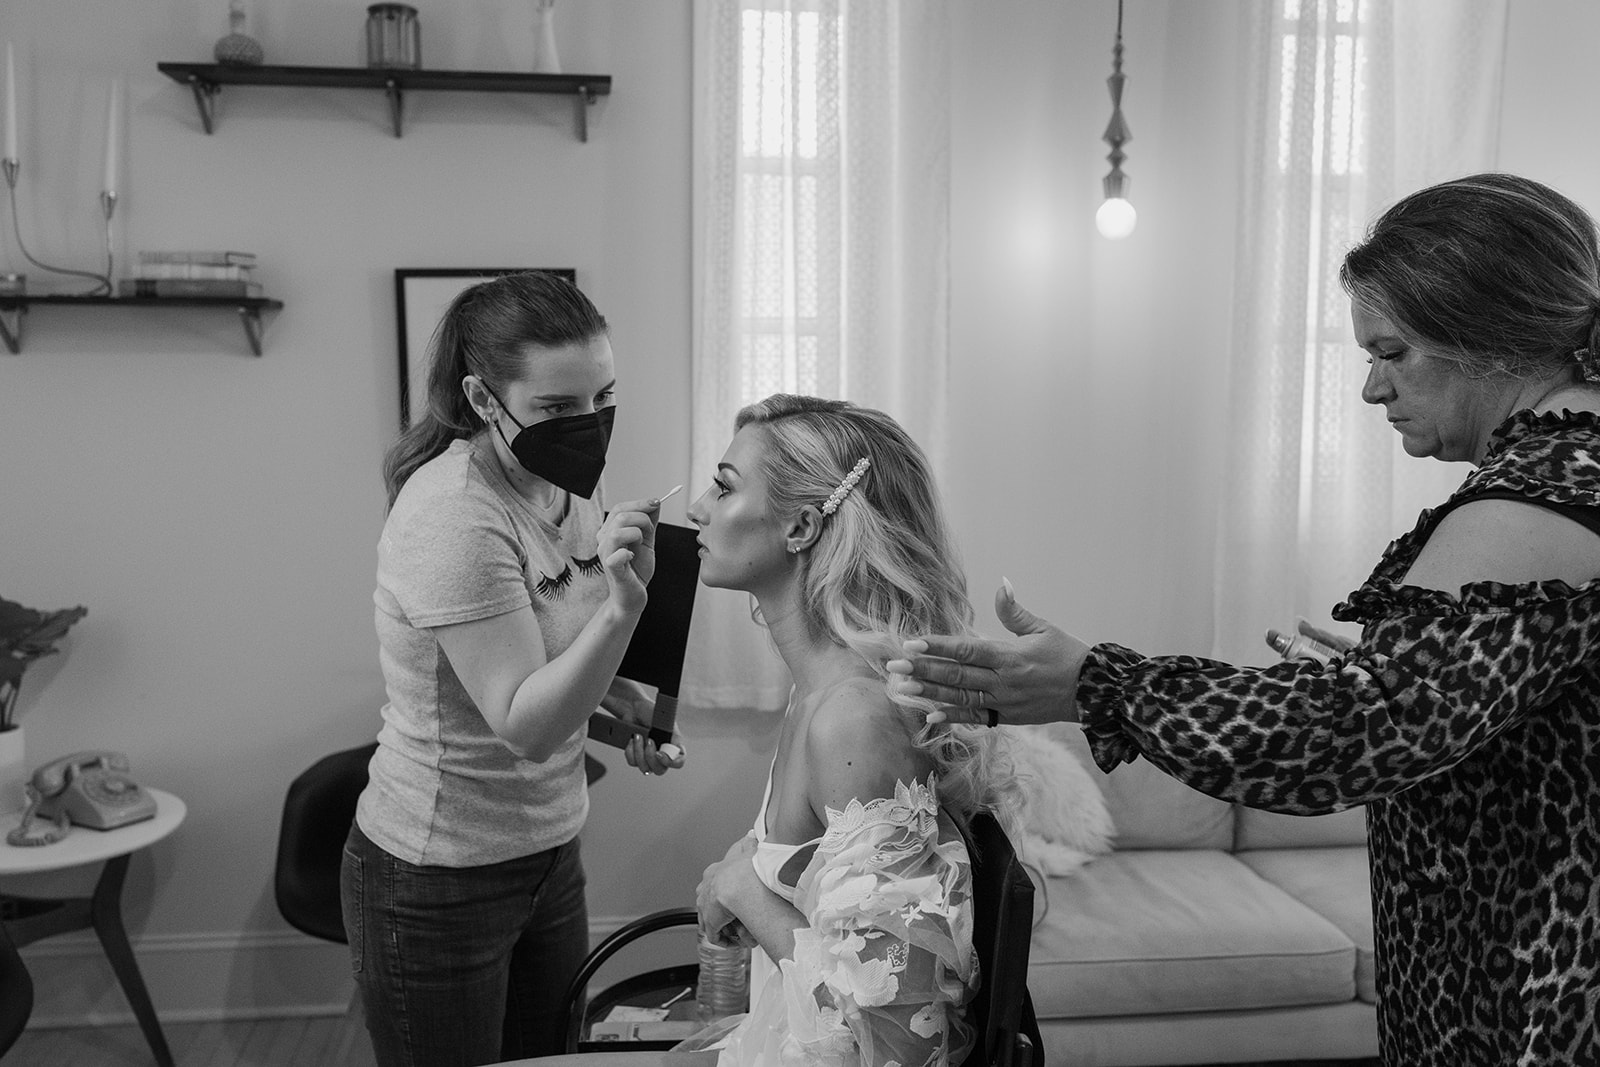 The bride getting pampered by both her hair and makeup artists.